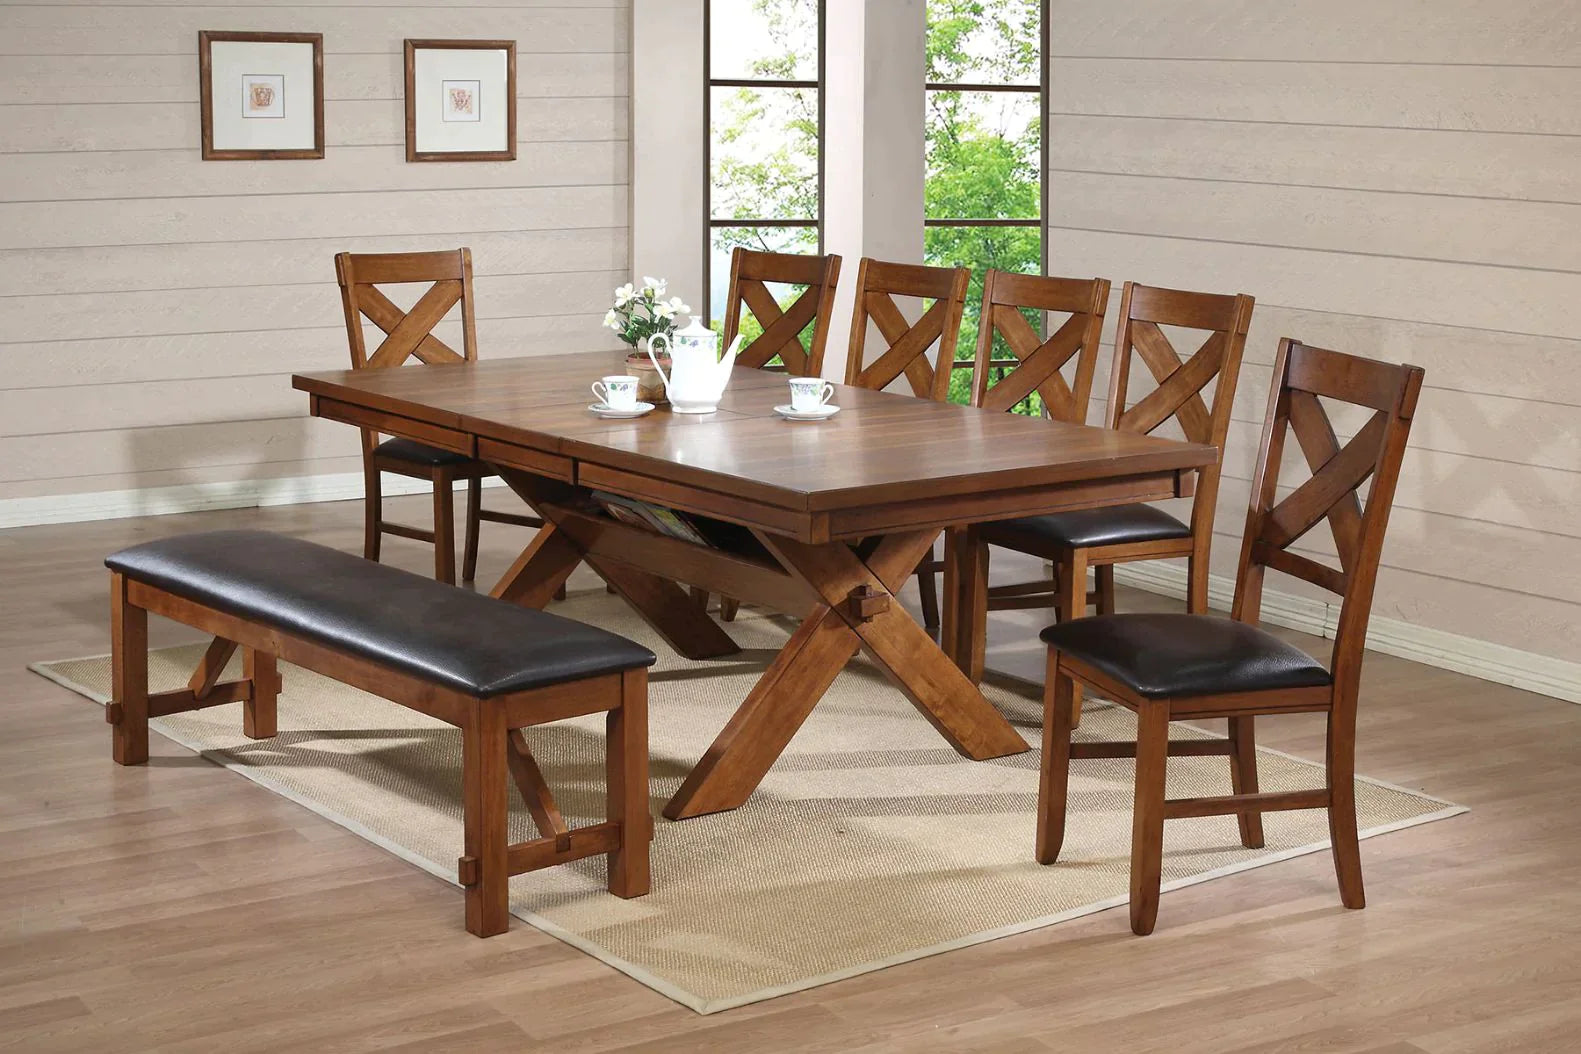 Apollo Walnut Dining Table Model 70000 By ACME Furniture